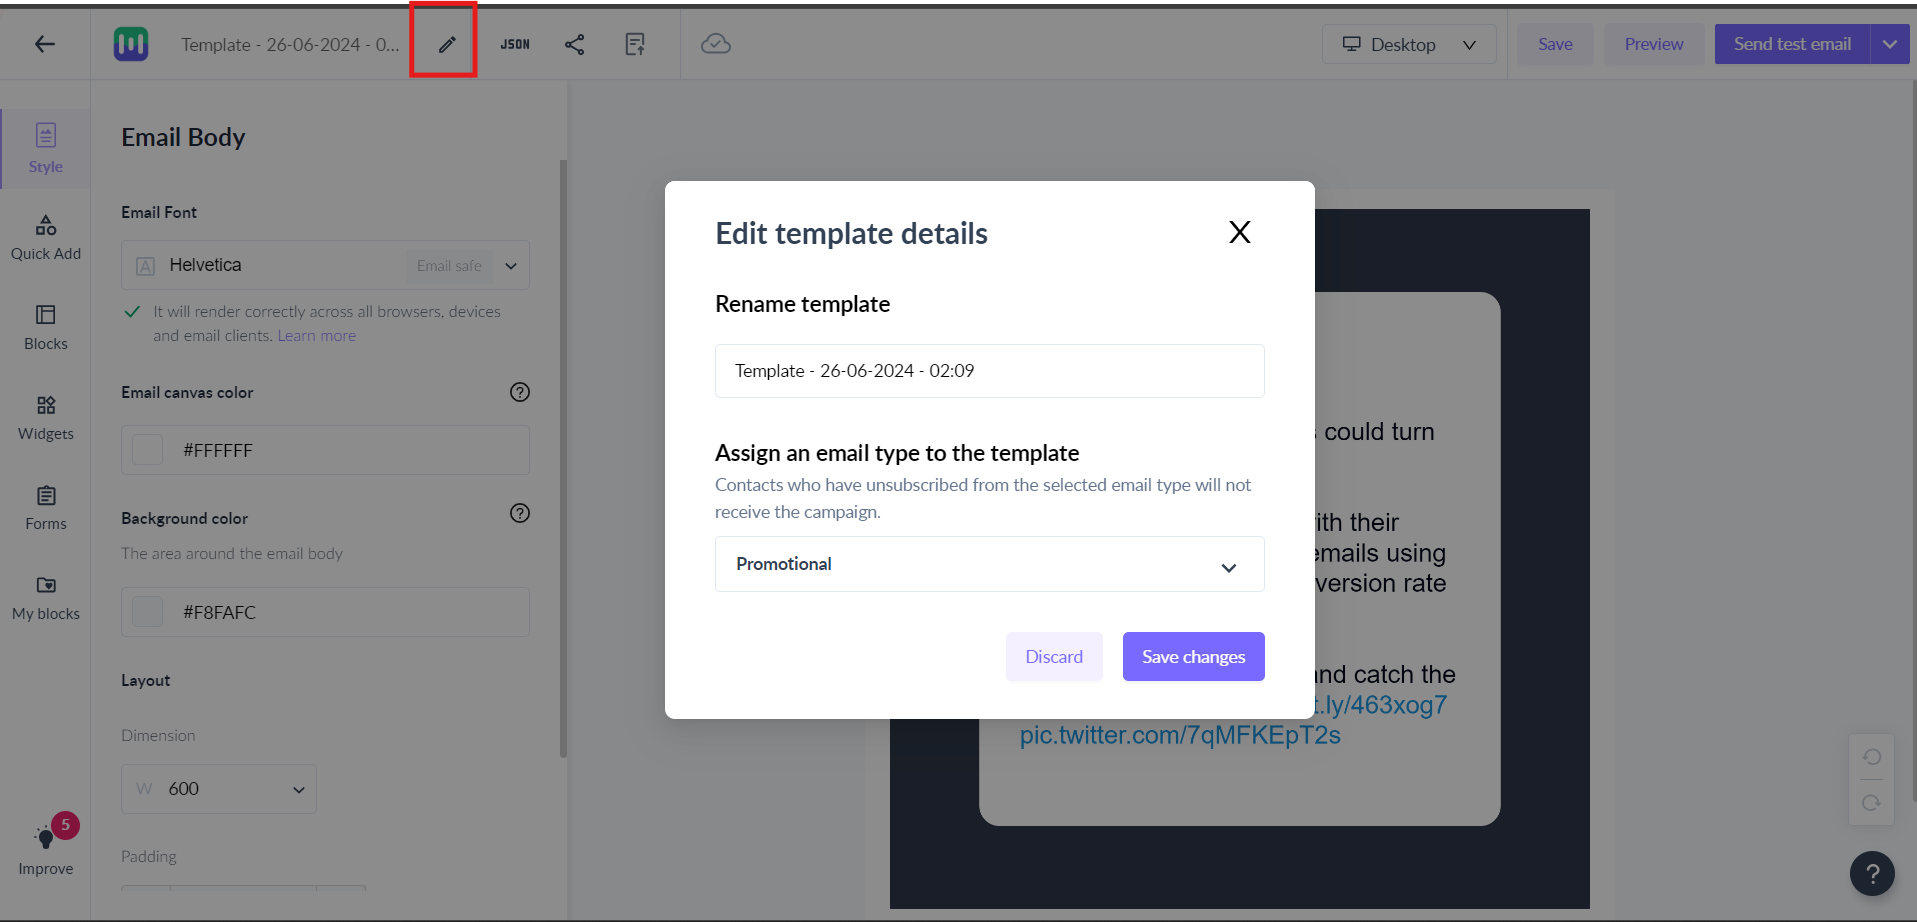 How to assign an email type to a template in Mailmodo